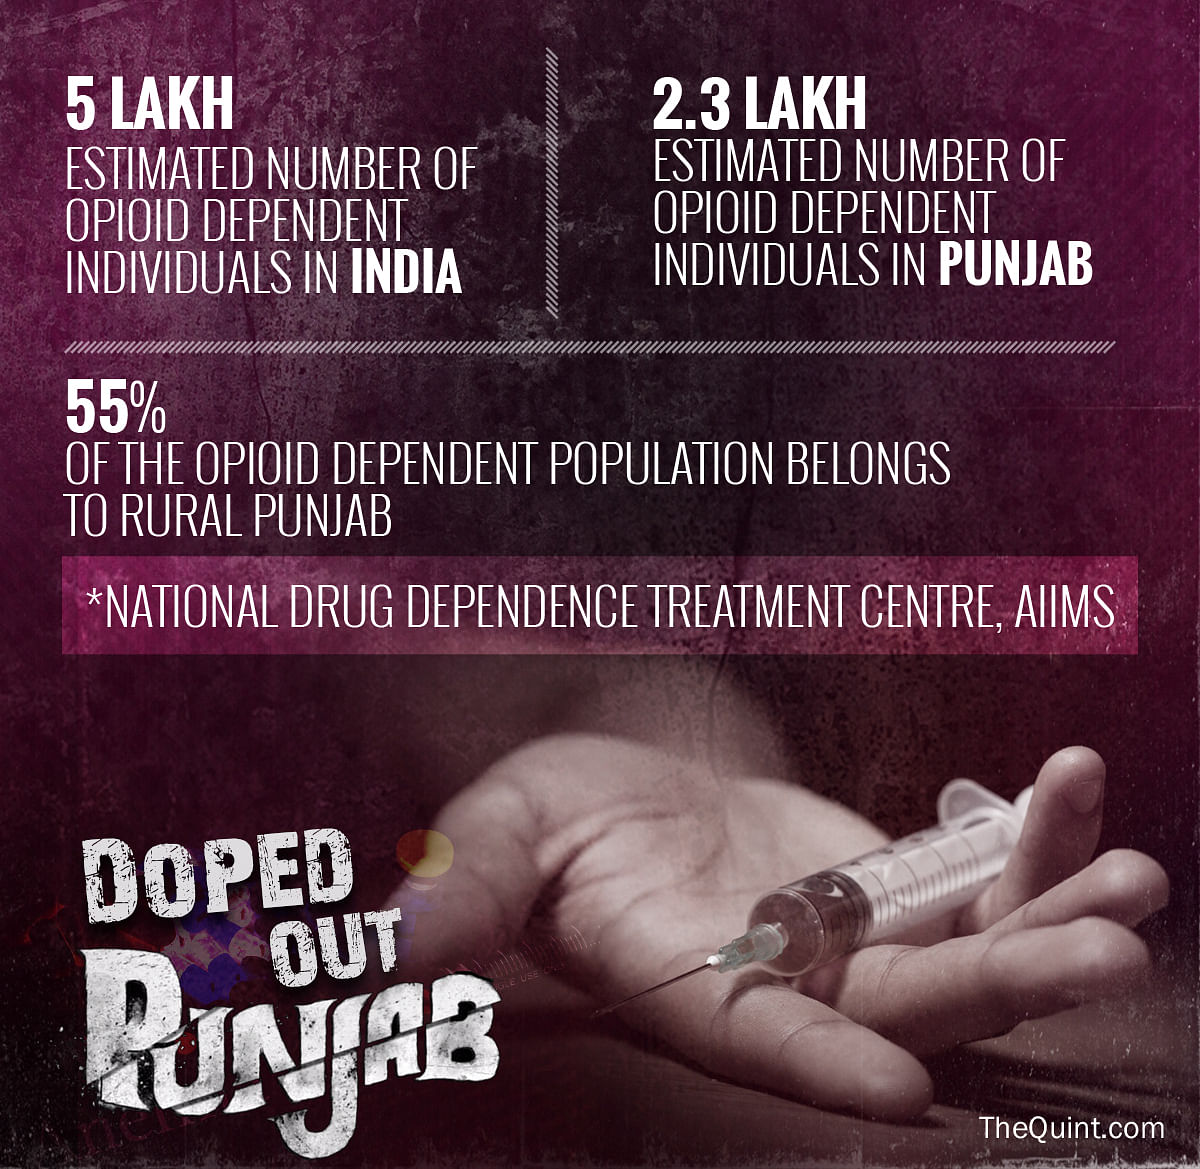 Shocking statistics that prove that “excessive swearing” is the appropriate response to Punjab’s drug problem.